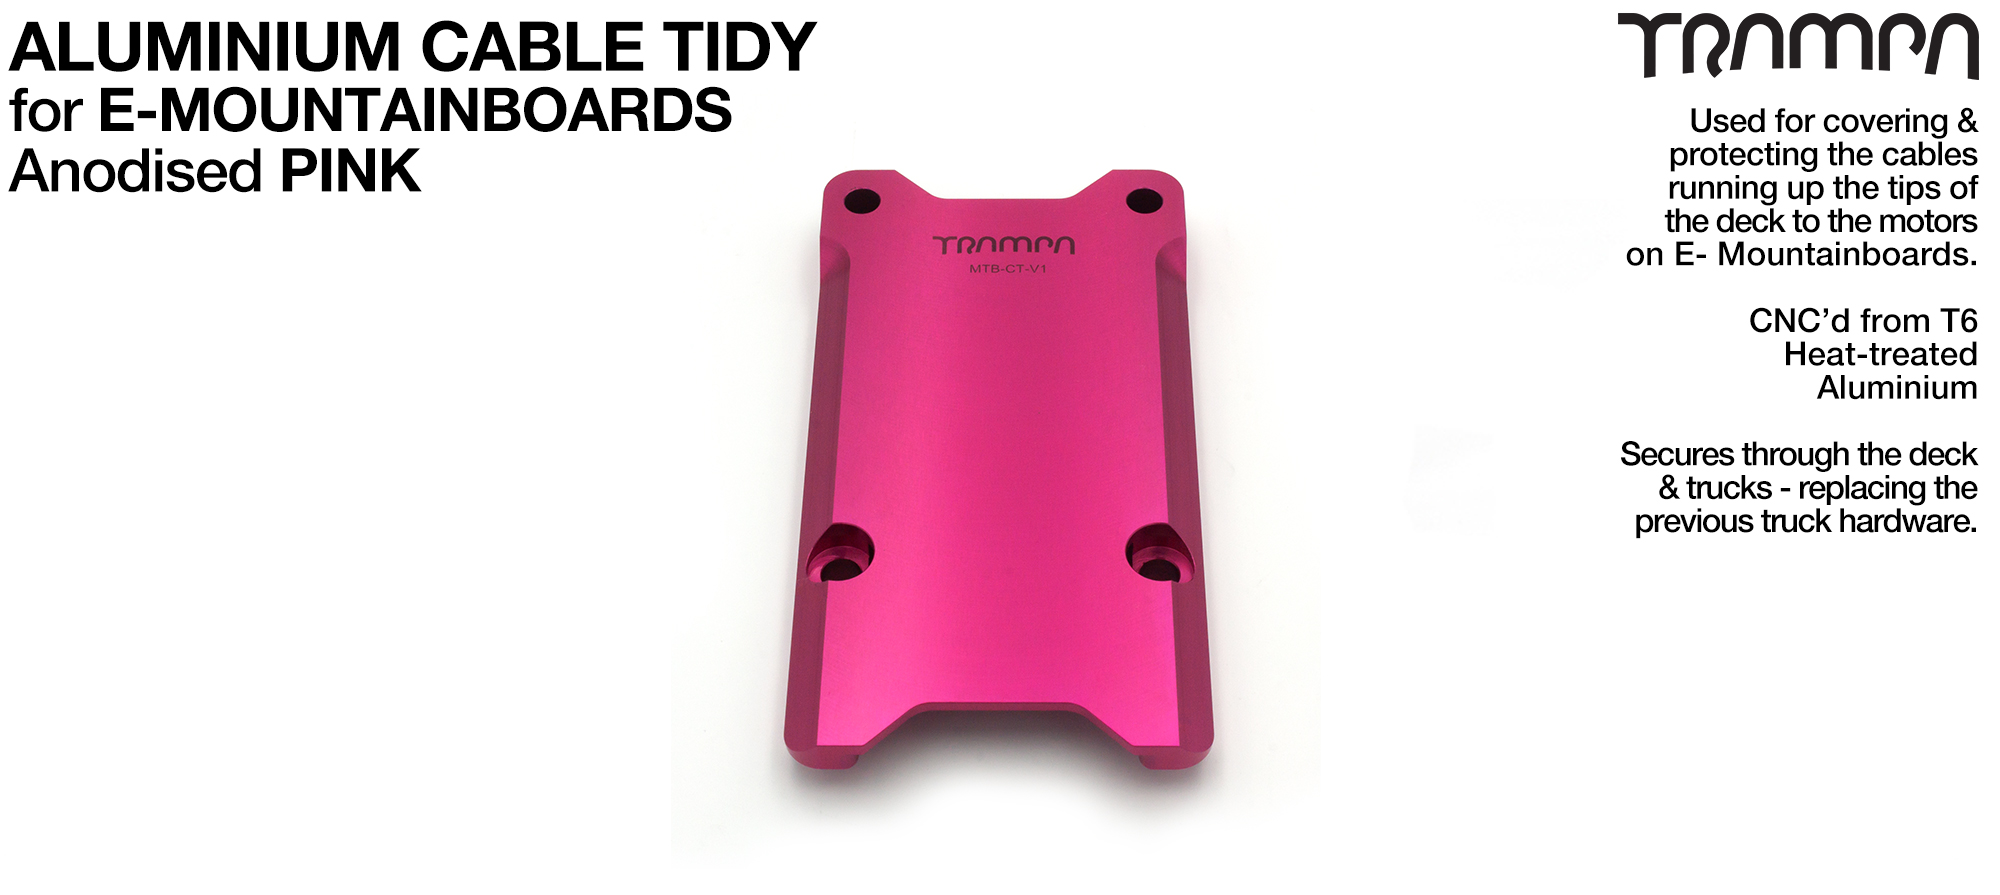 Anodised Aluminum Cable Tidy - PINK V1